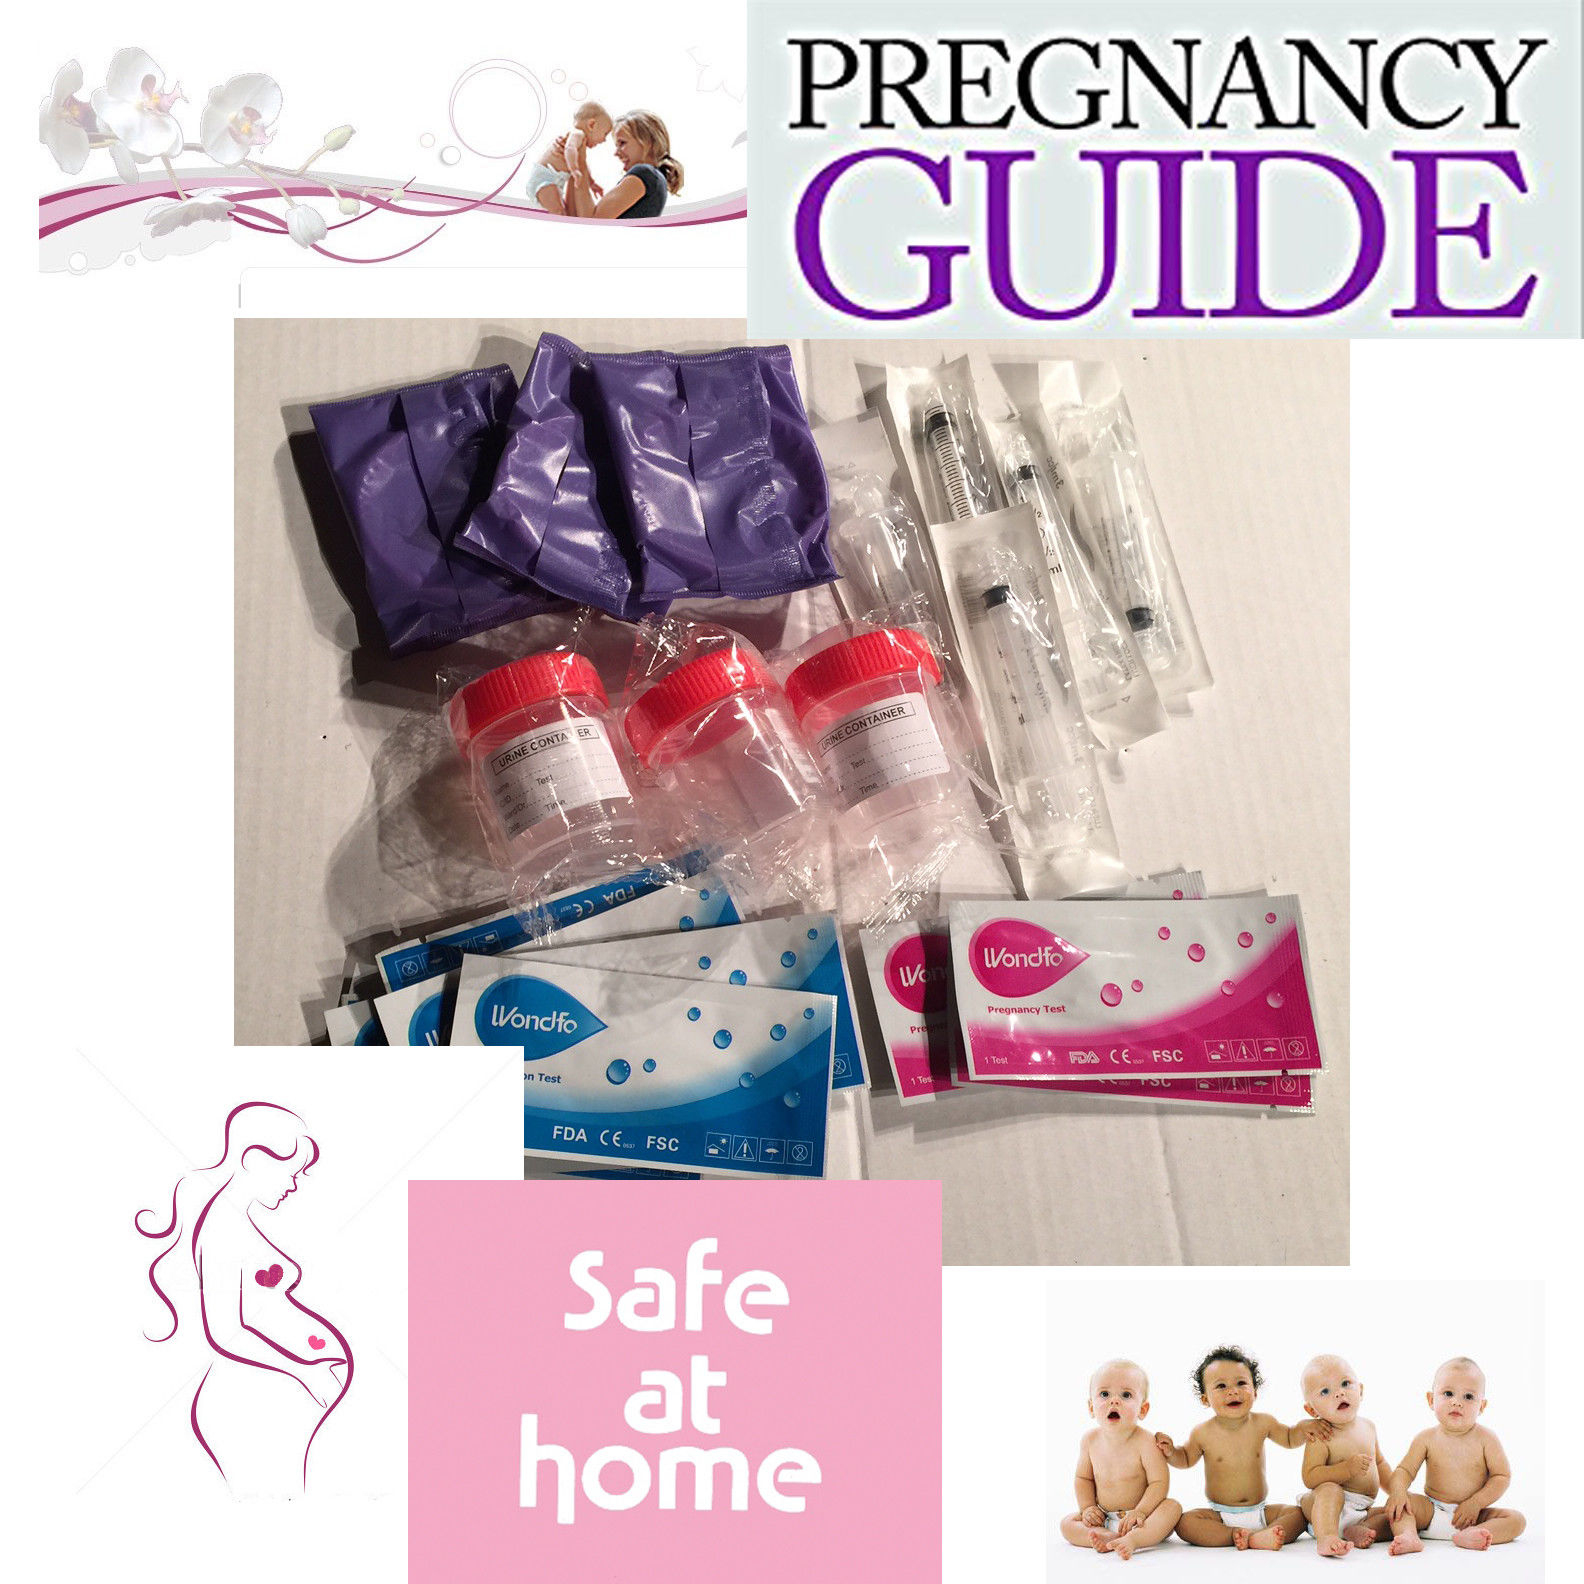 Artificial Insemination Kit – At Home Conception Kits For ... à Conception En Kit